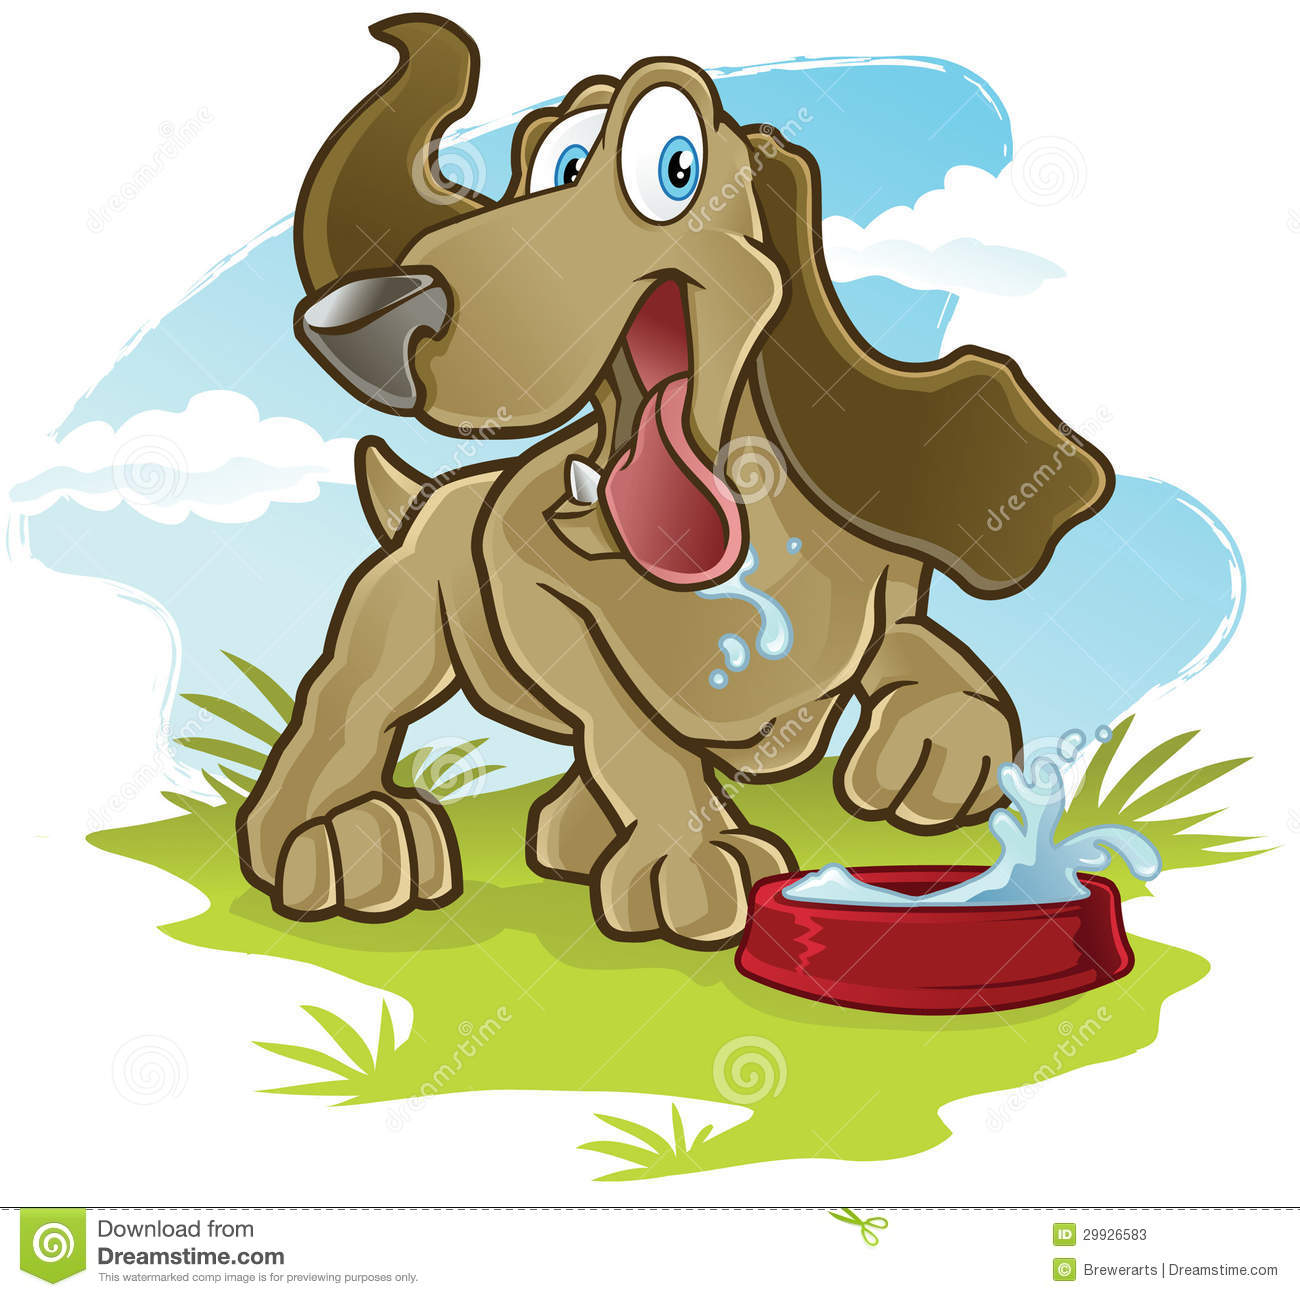 Childrens Cartoon Illustration Of A Dog Drinking Water